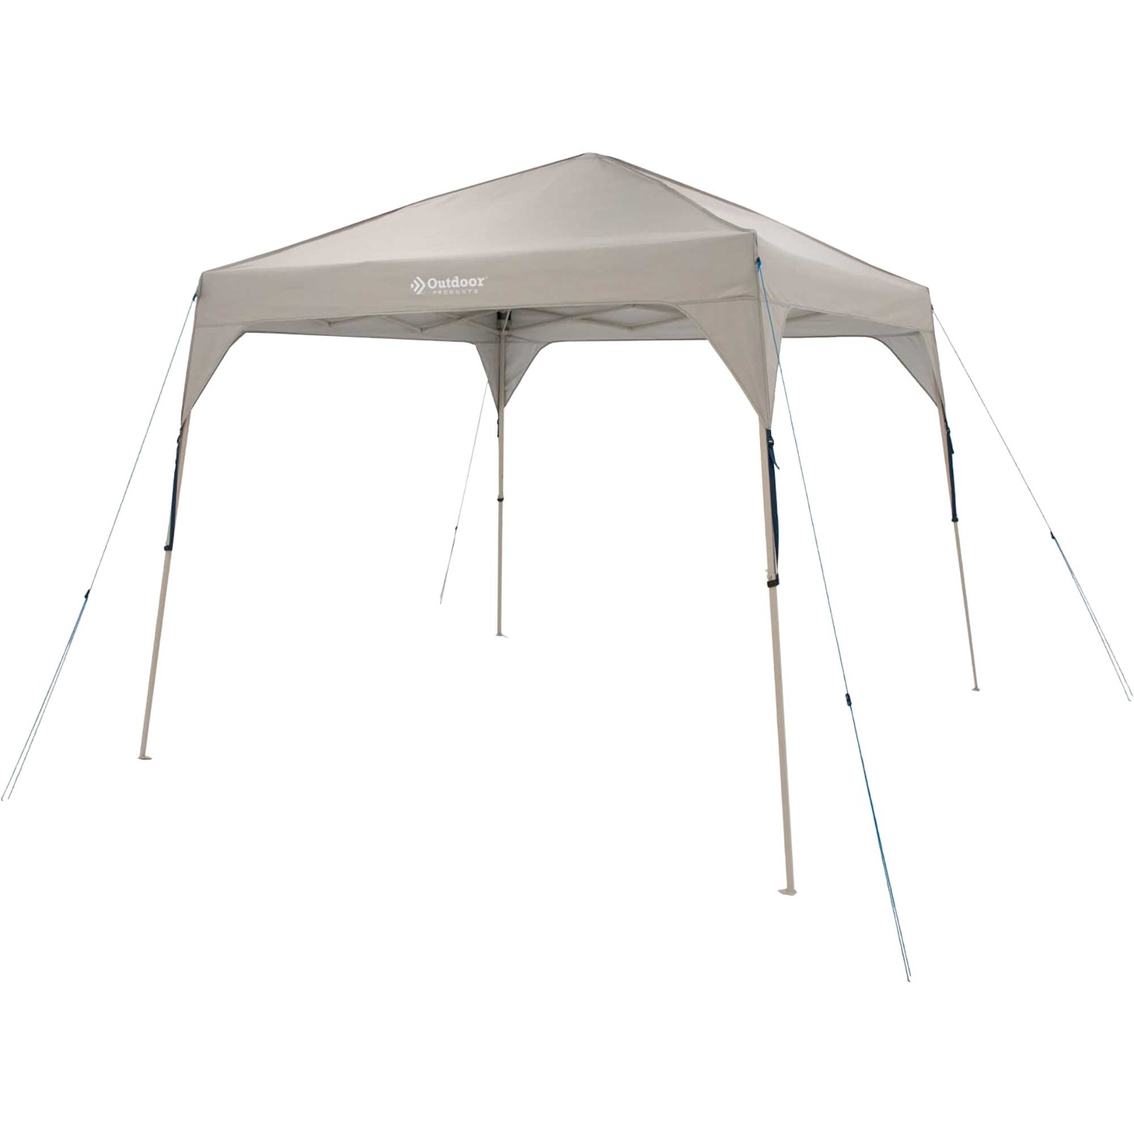 Outdoor Products 10x10 Slant Leg Canopy - Image 1 of 10